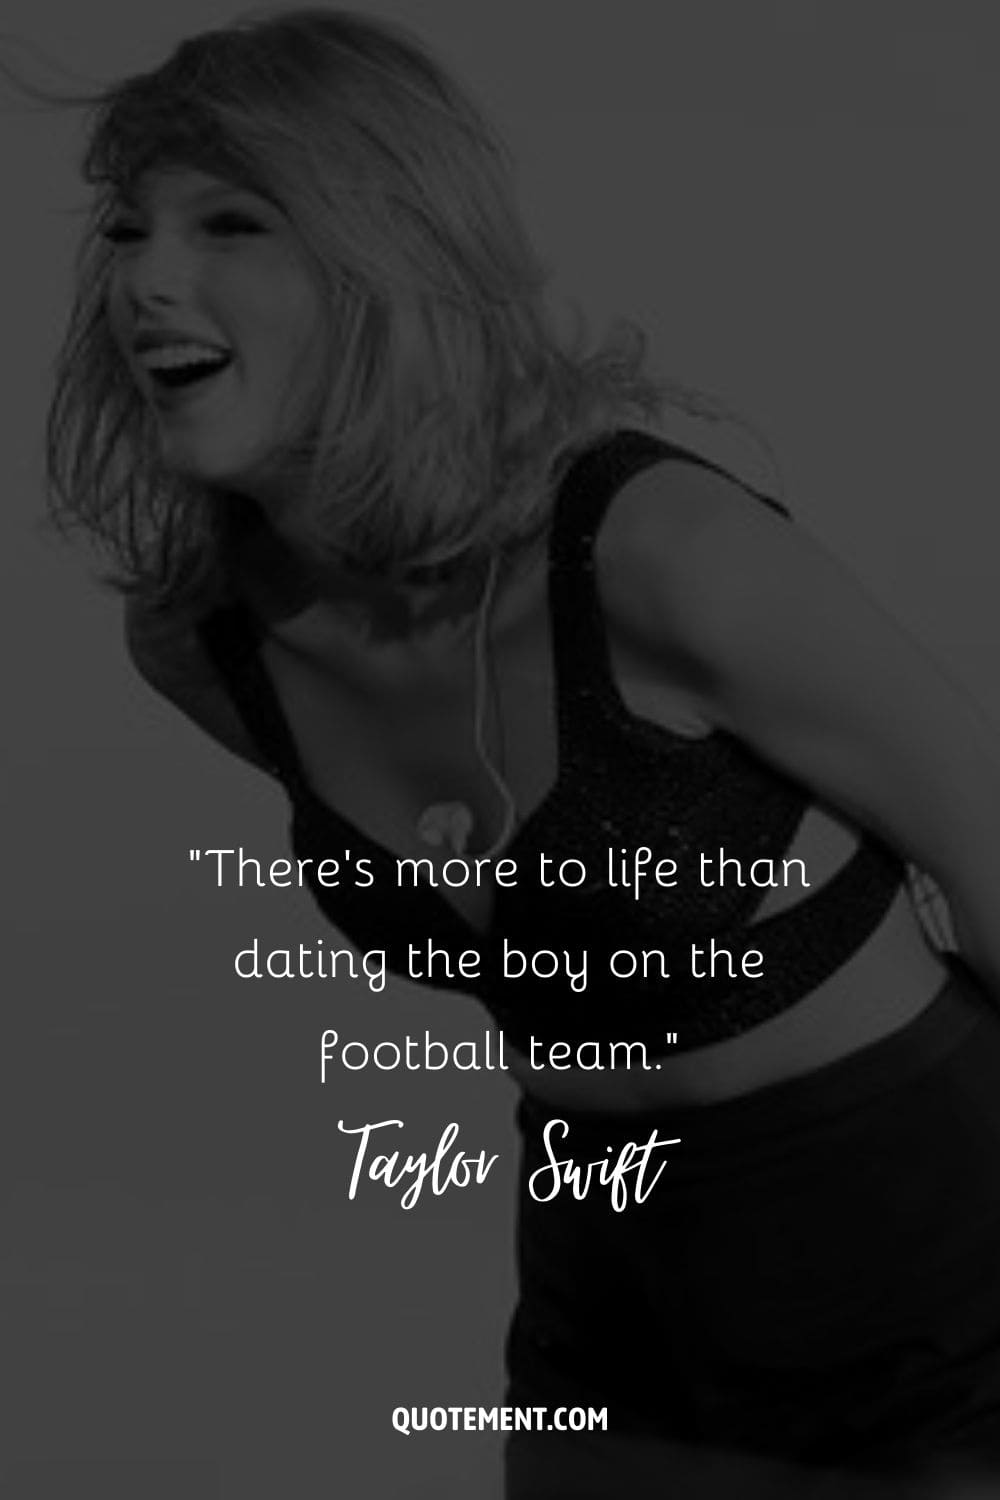 “There's more to life than dating the boy on the football team.” ― Taylor Swift